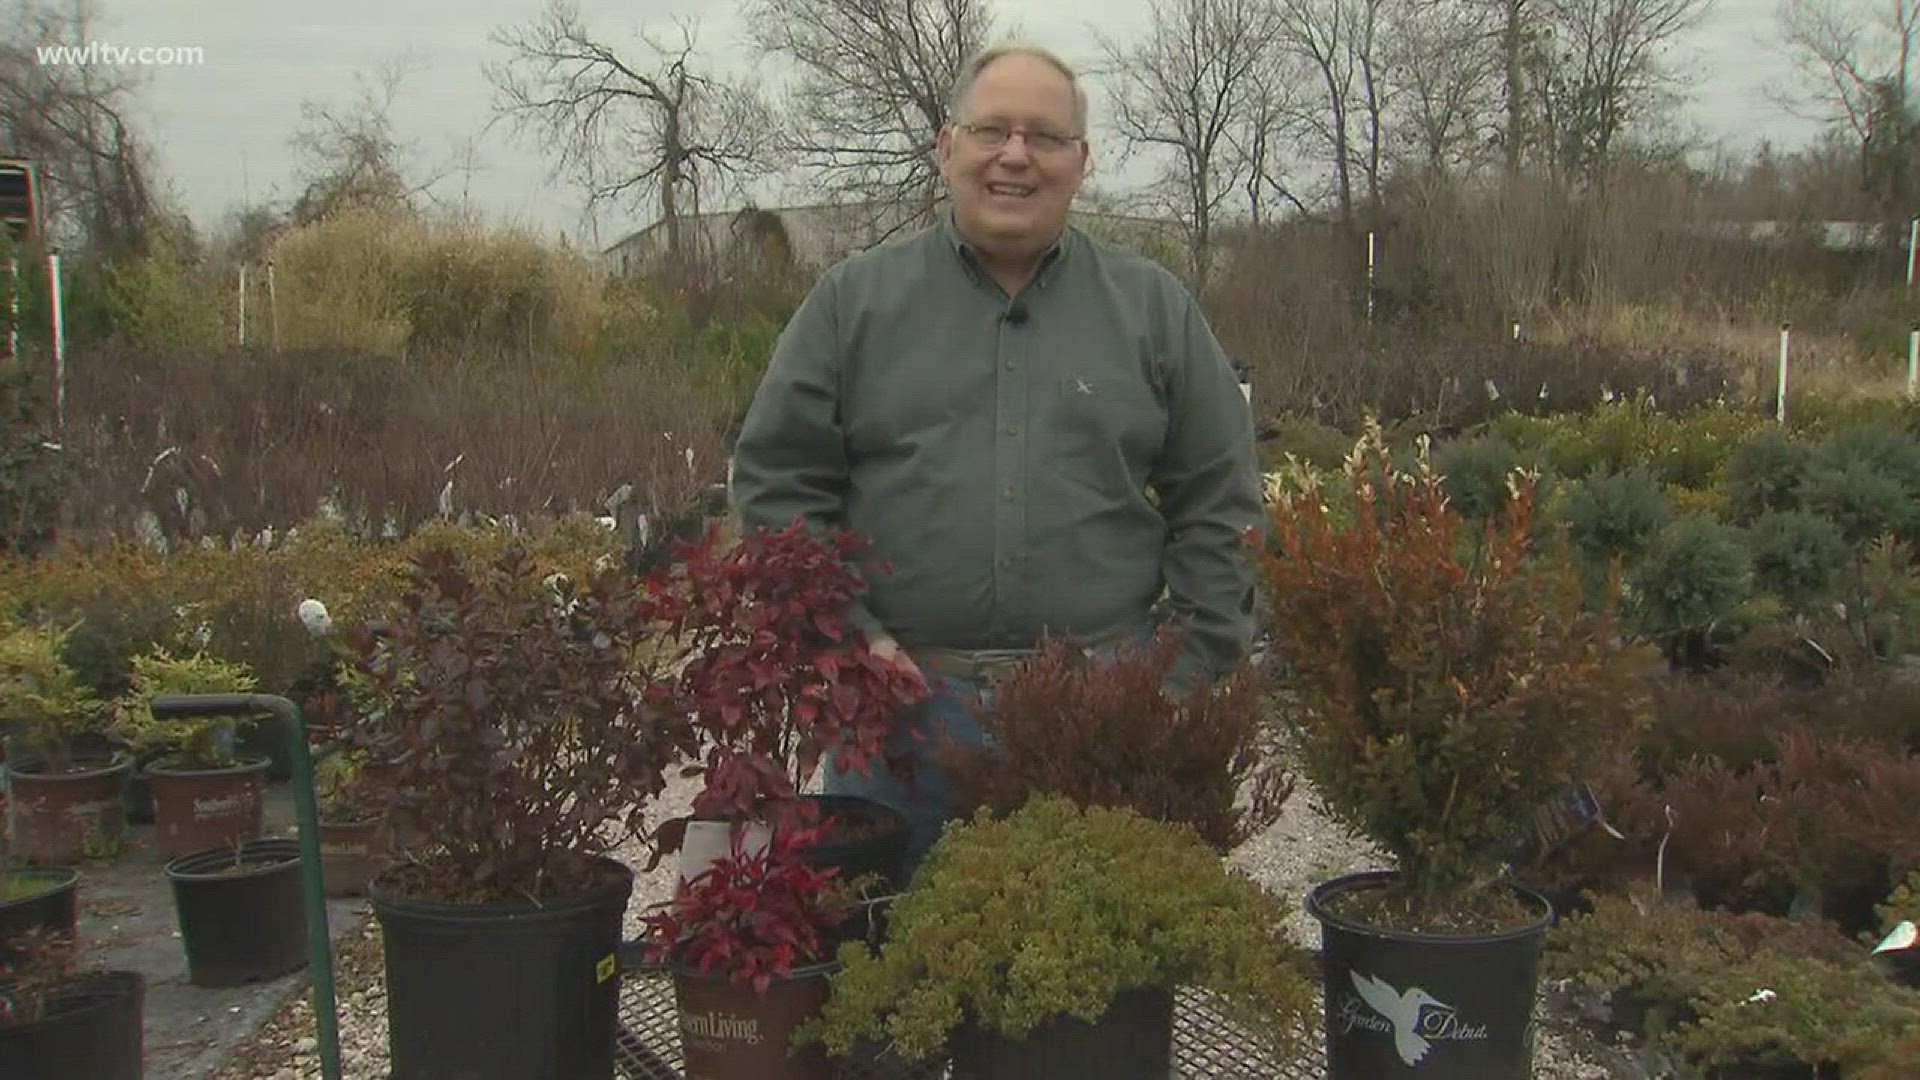 Horticulturist Dan Gill explains why some evergreen plants turn various colors after particularly bad freezes.